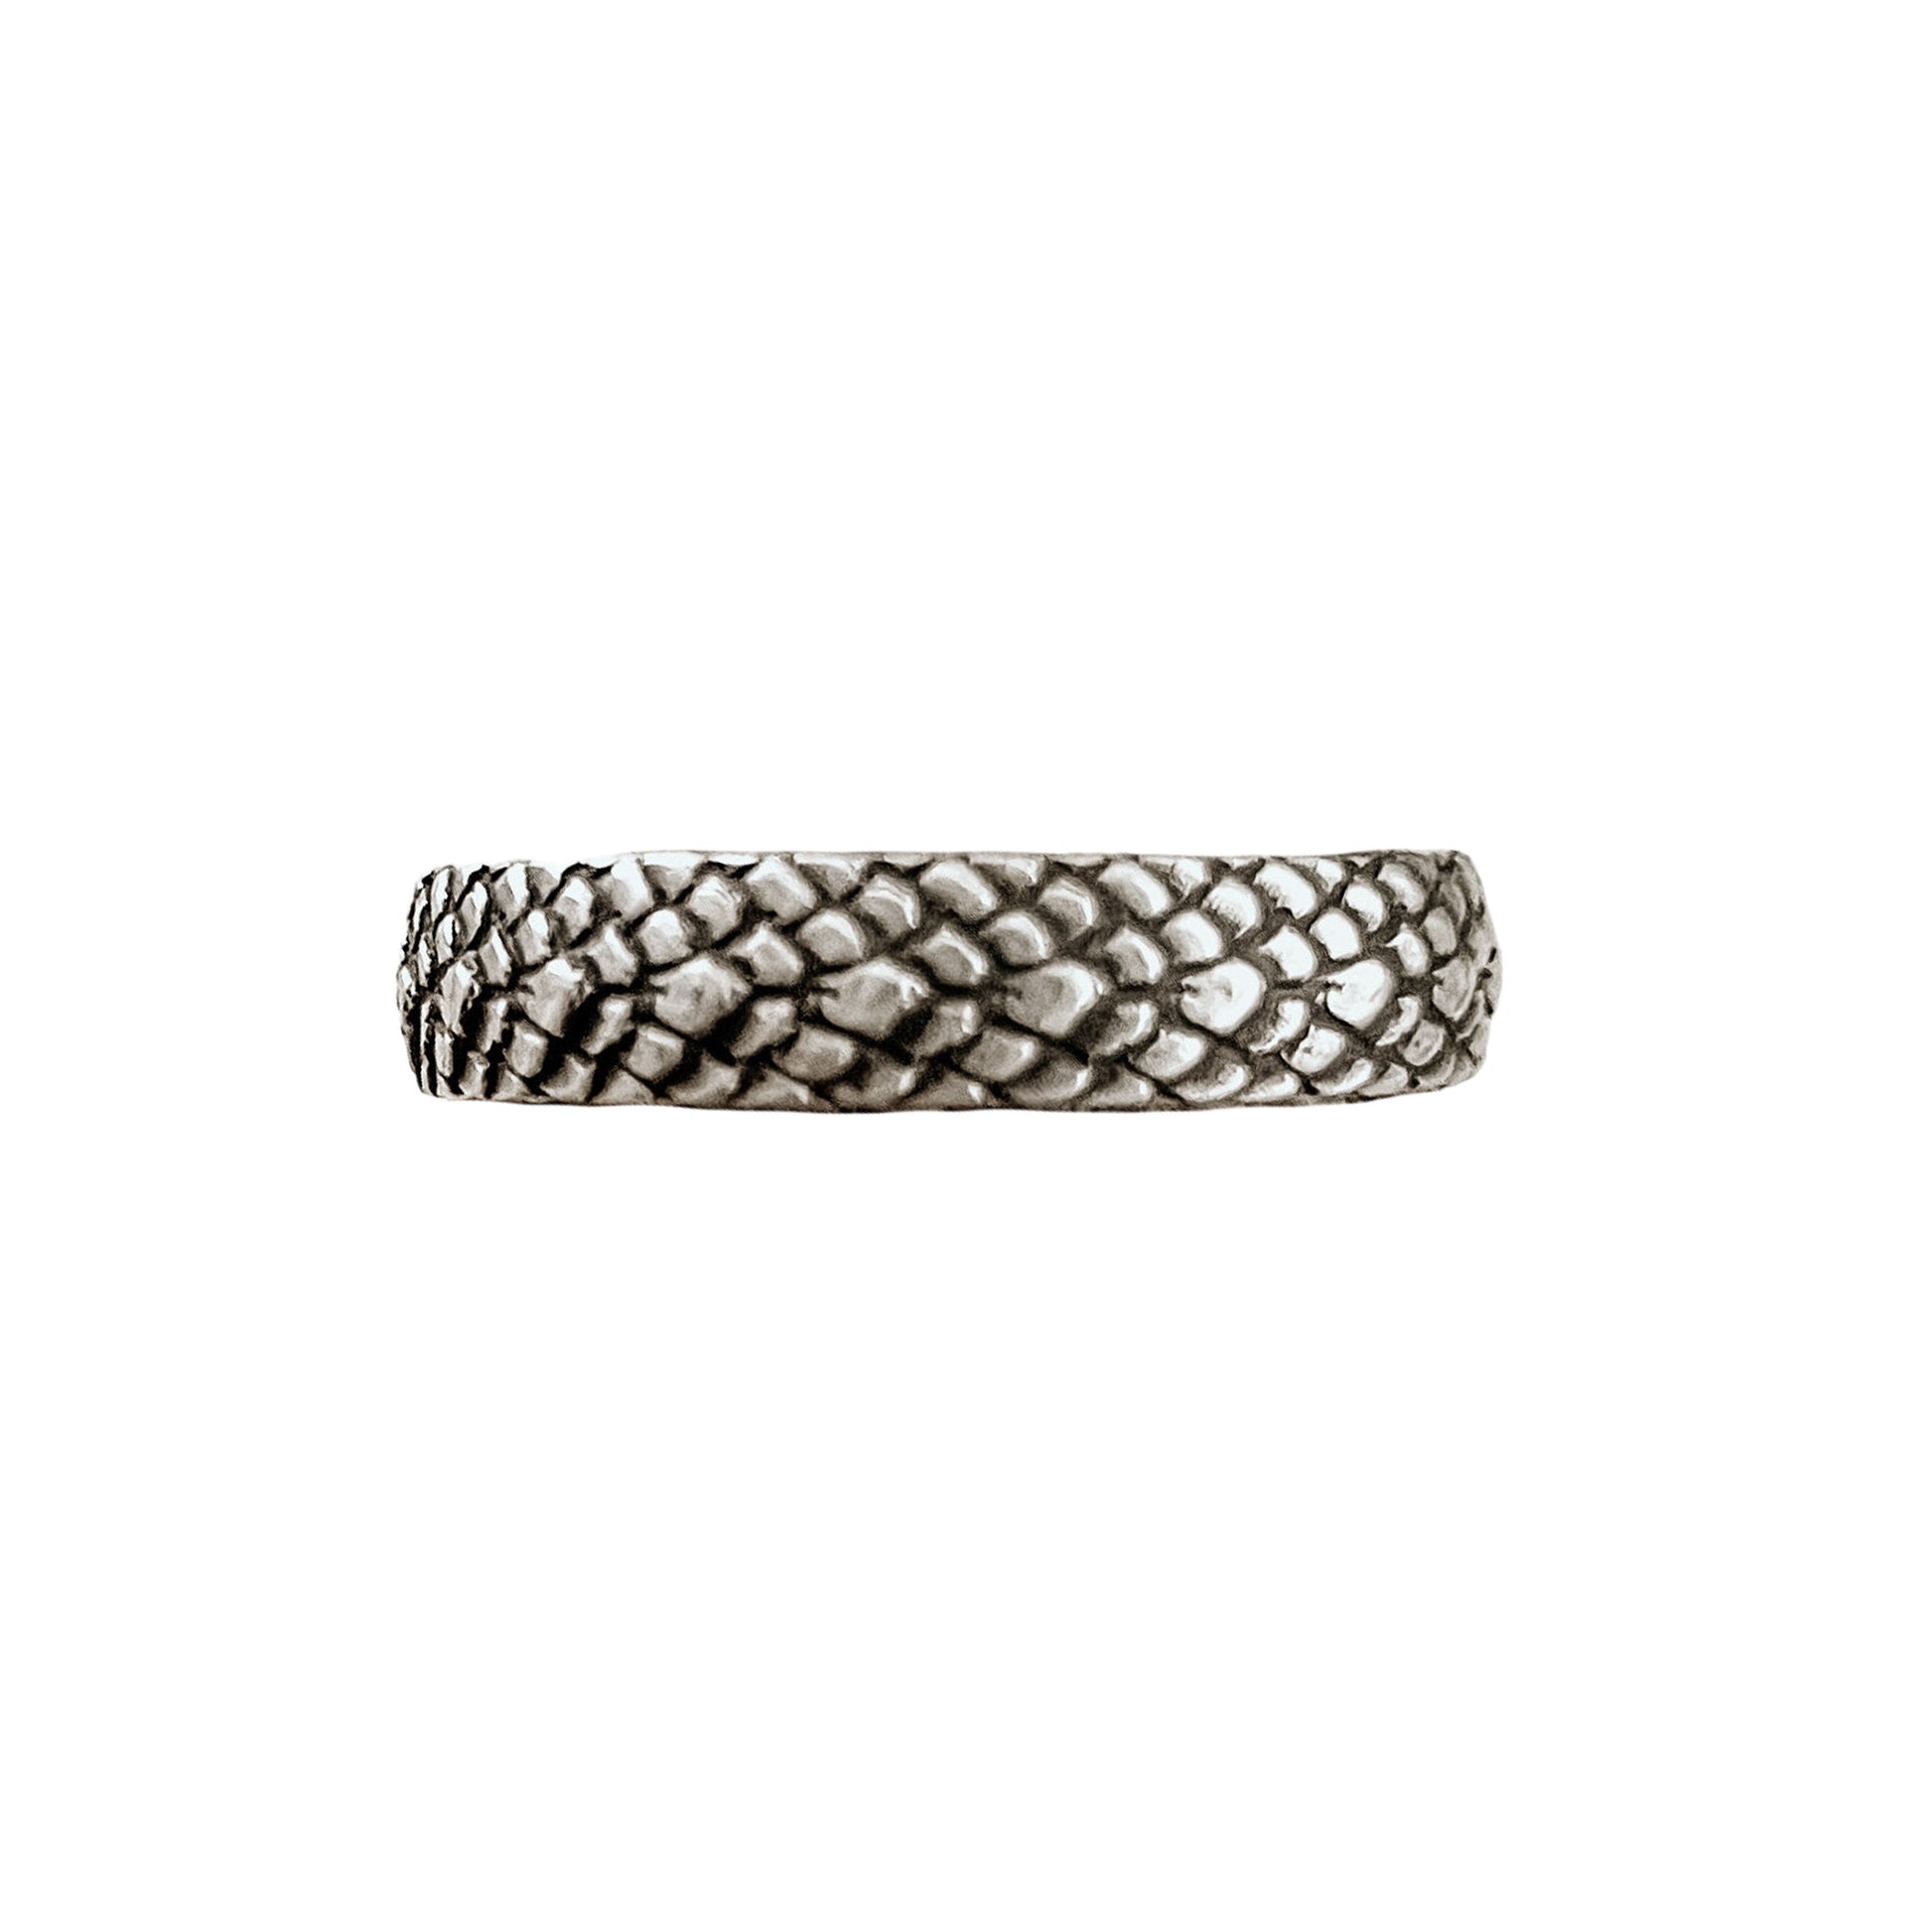 Snakeskin Sterling Silver Stacking Ring shown in antiqued finish.